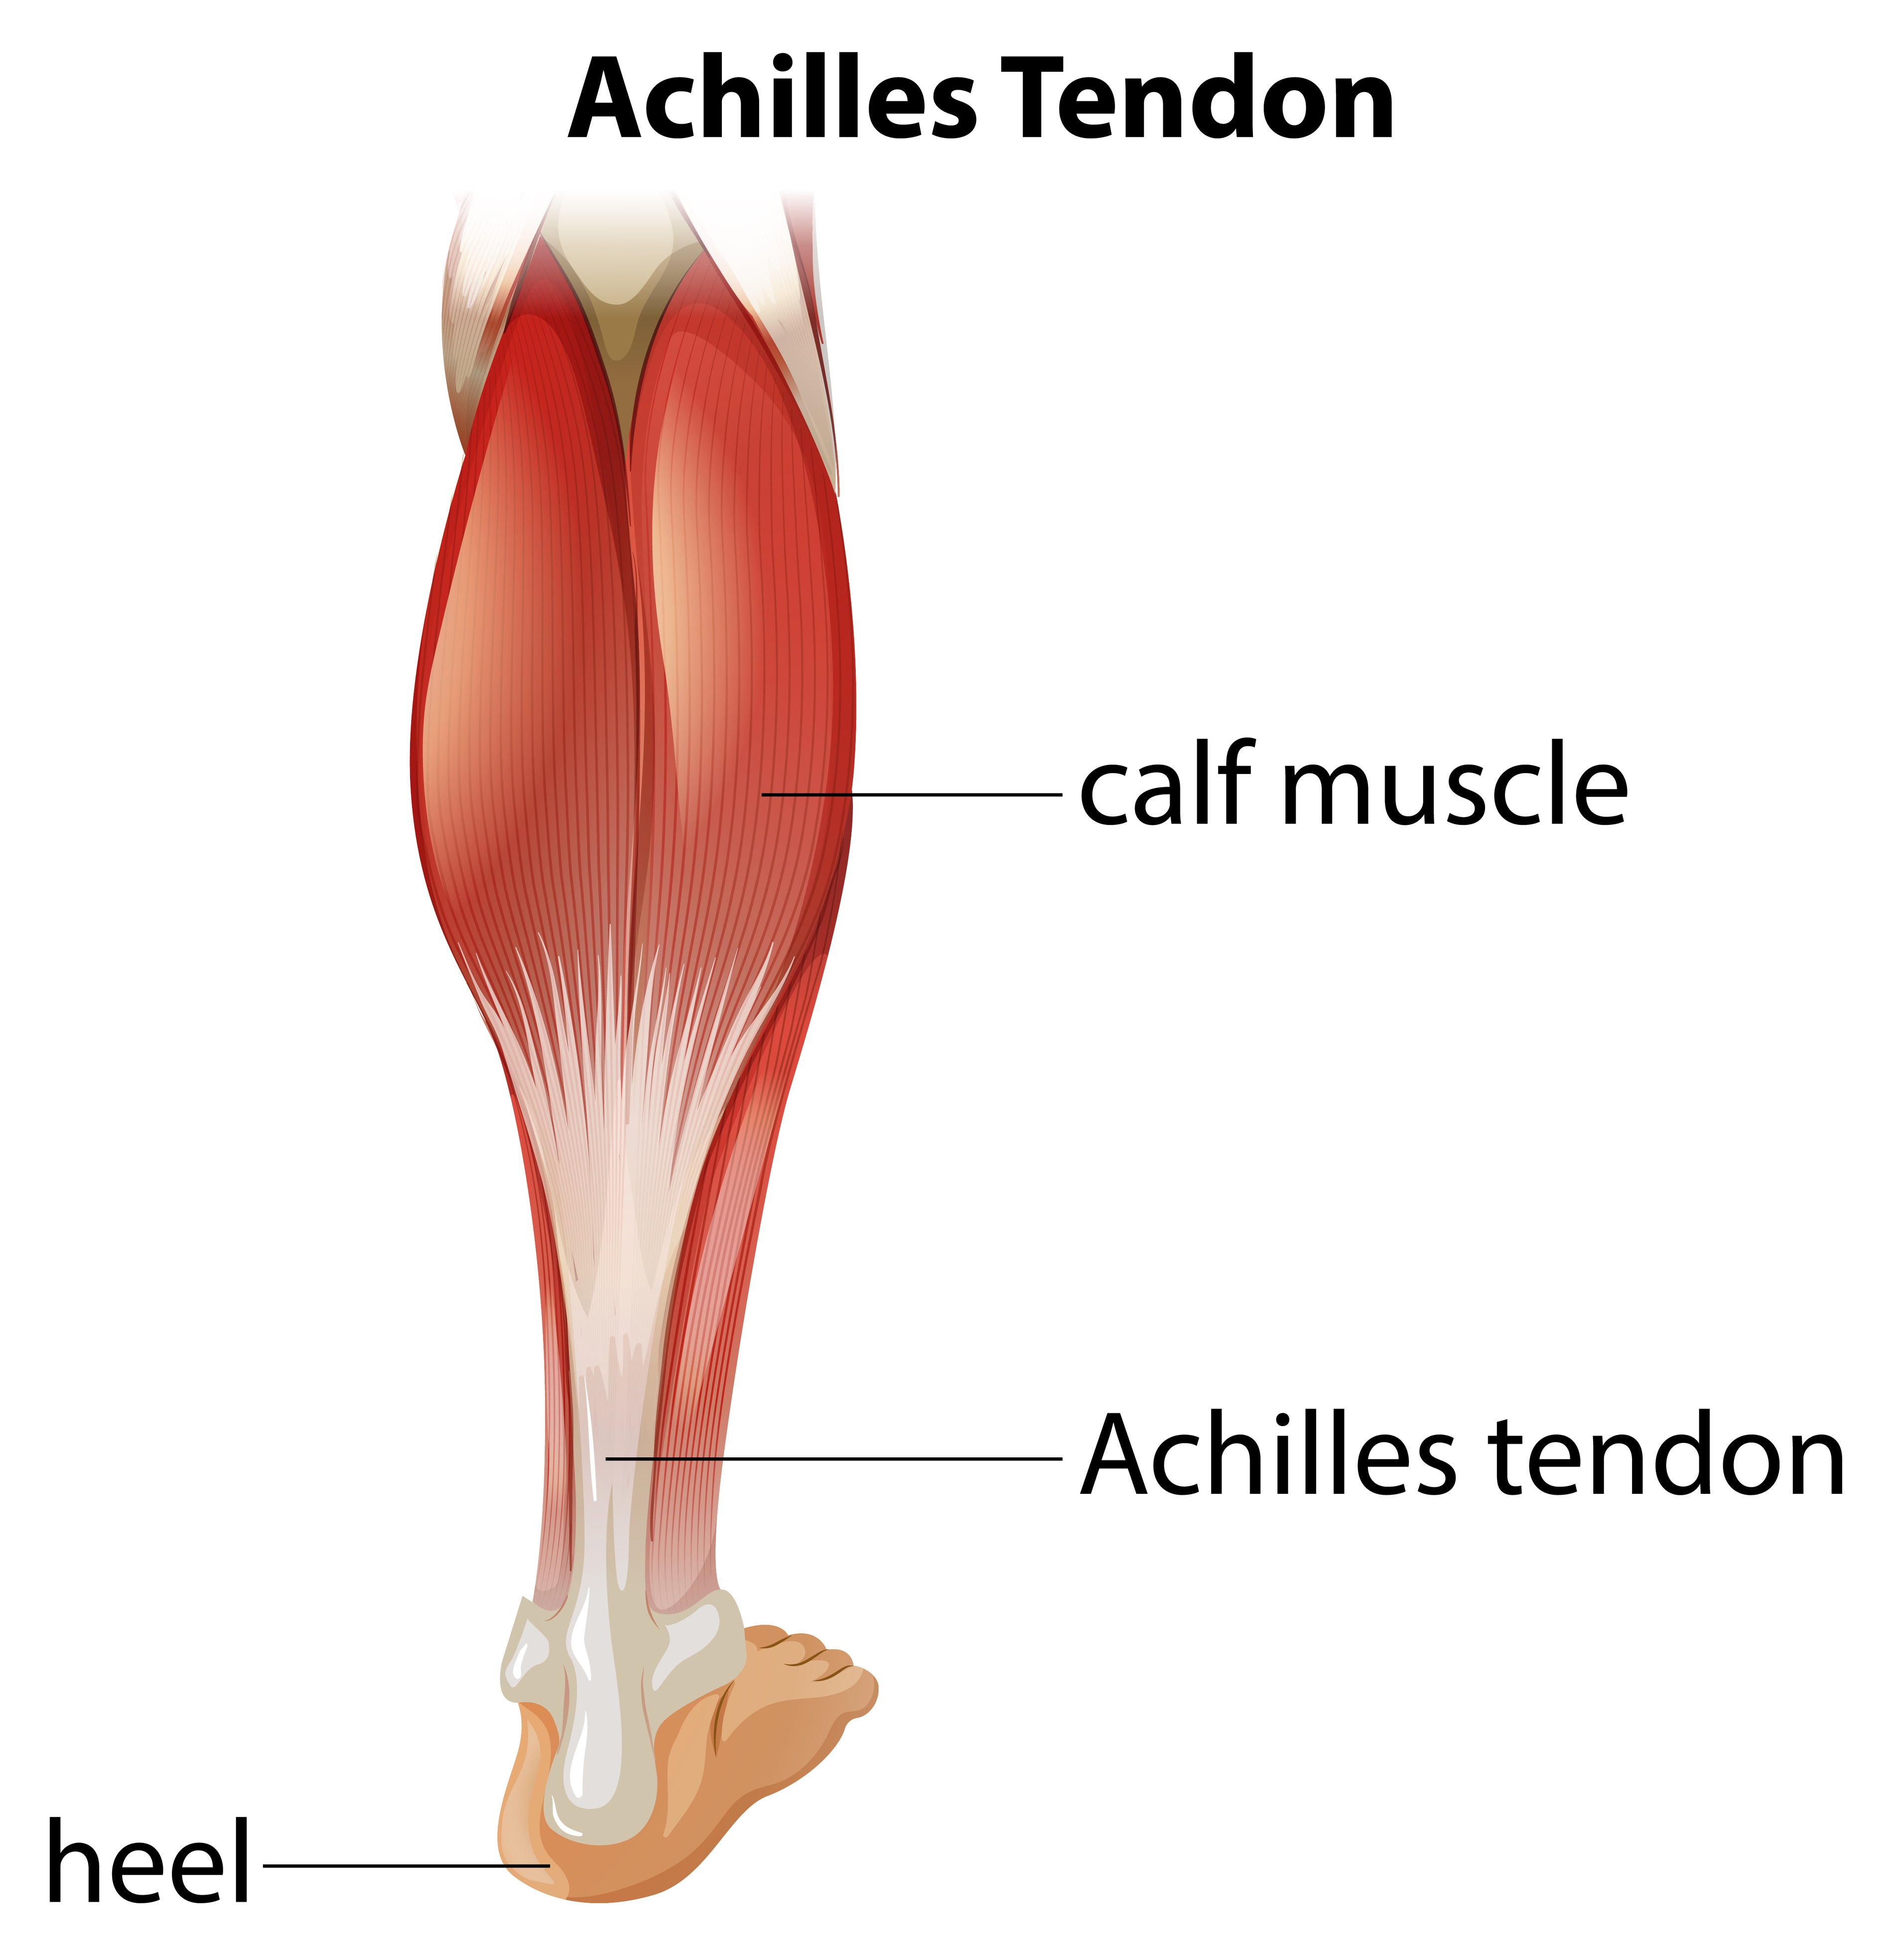 Midpoint & Insertional Achilles Tendonitis